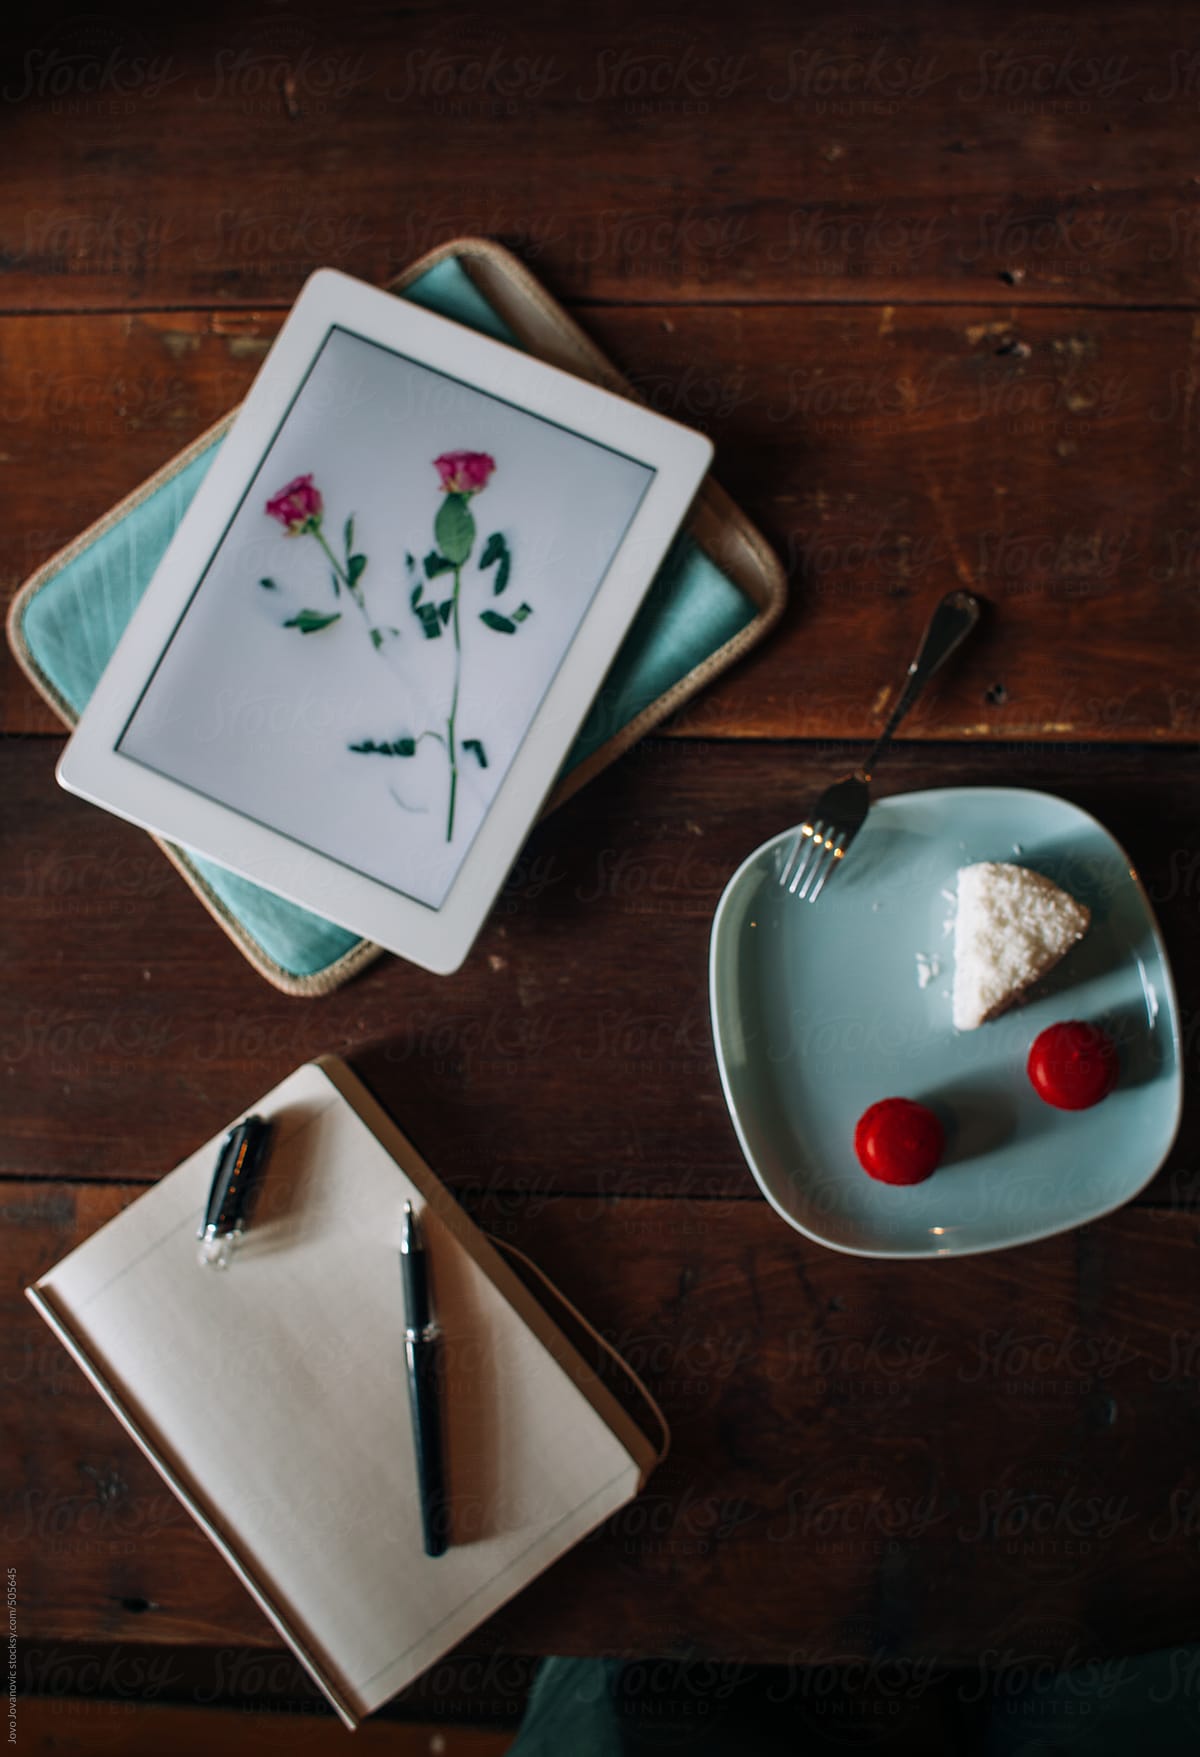 Tablet showing flowers, cake and notebook on table